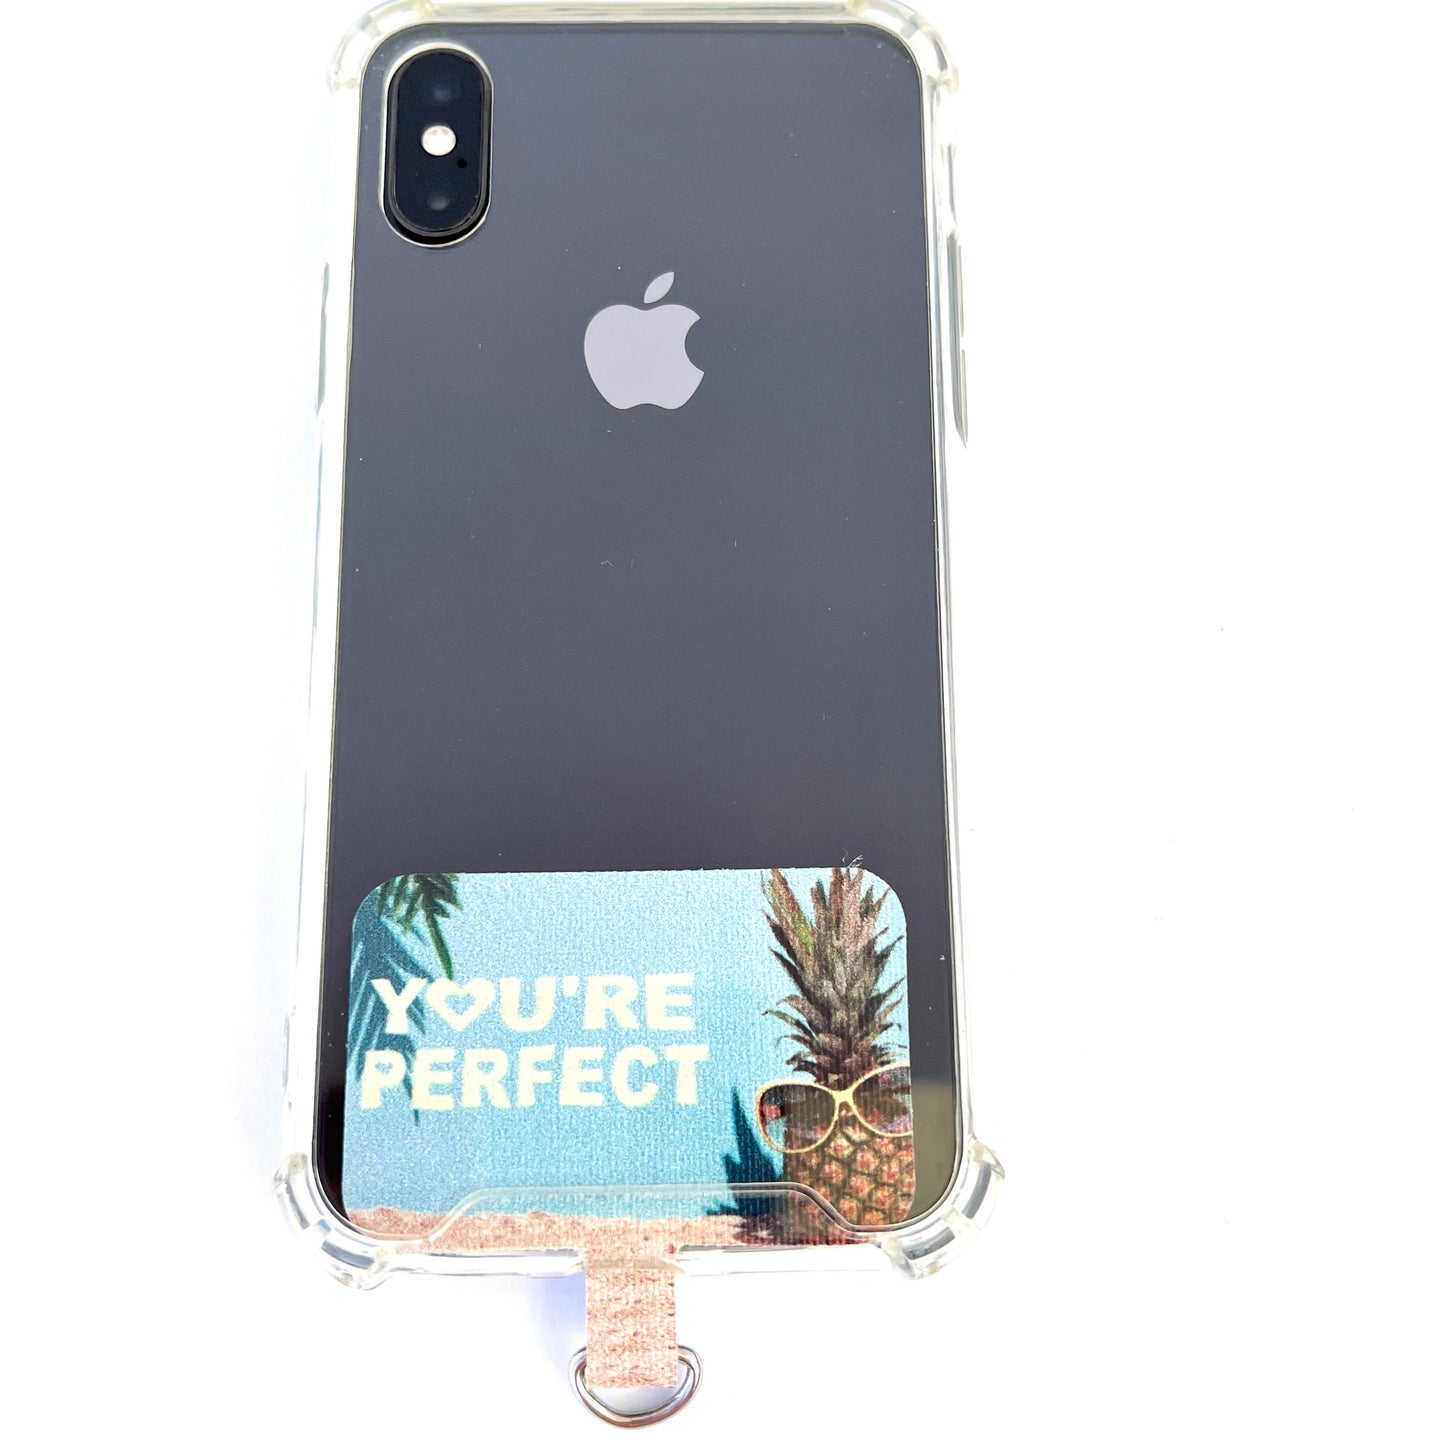 Your're perfect Phone Connector Patch